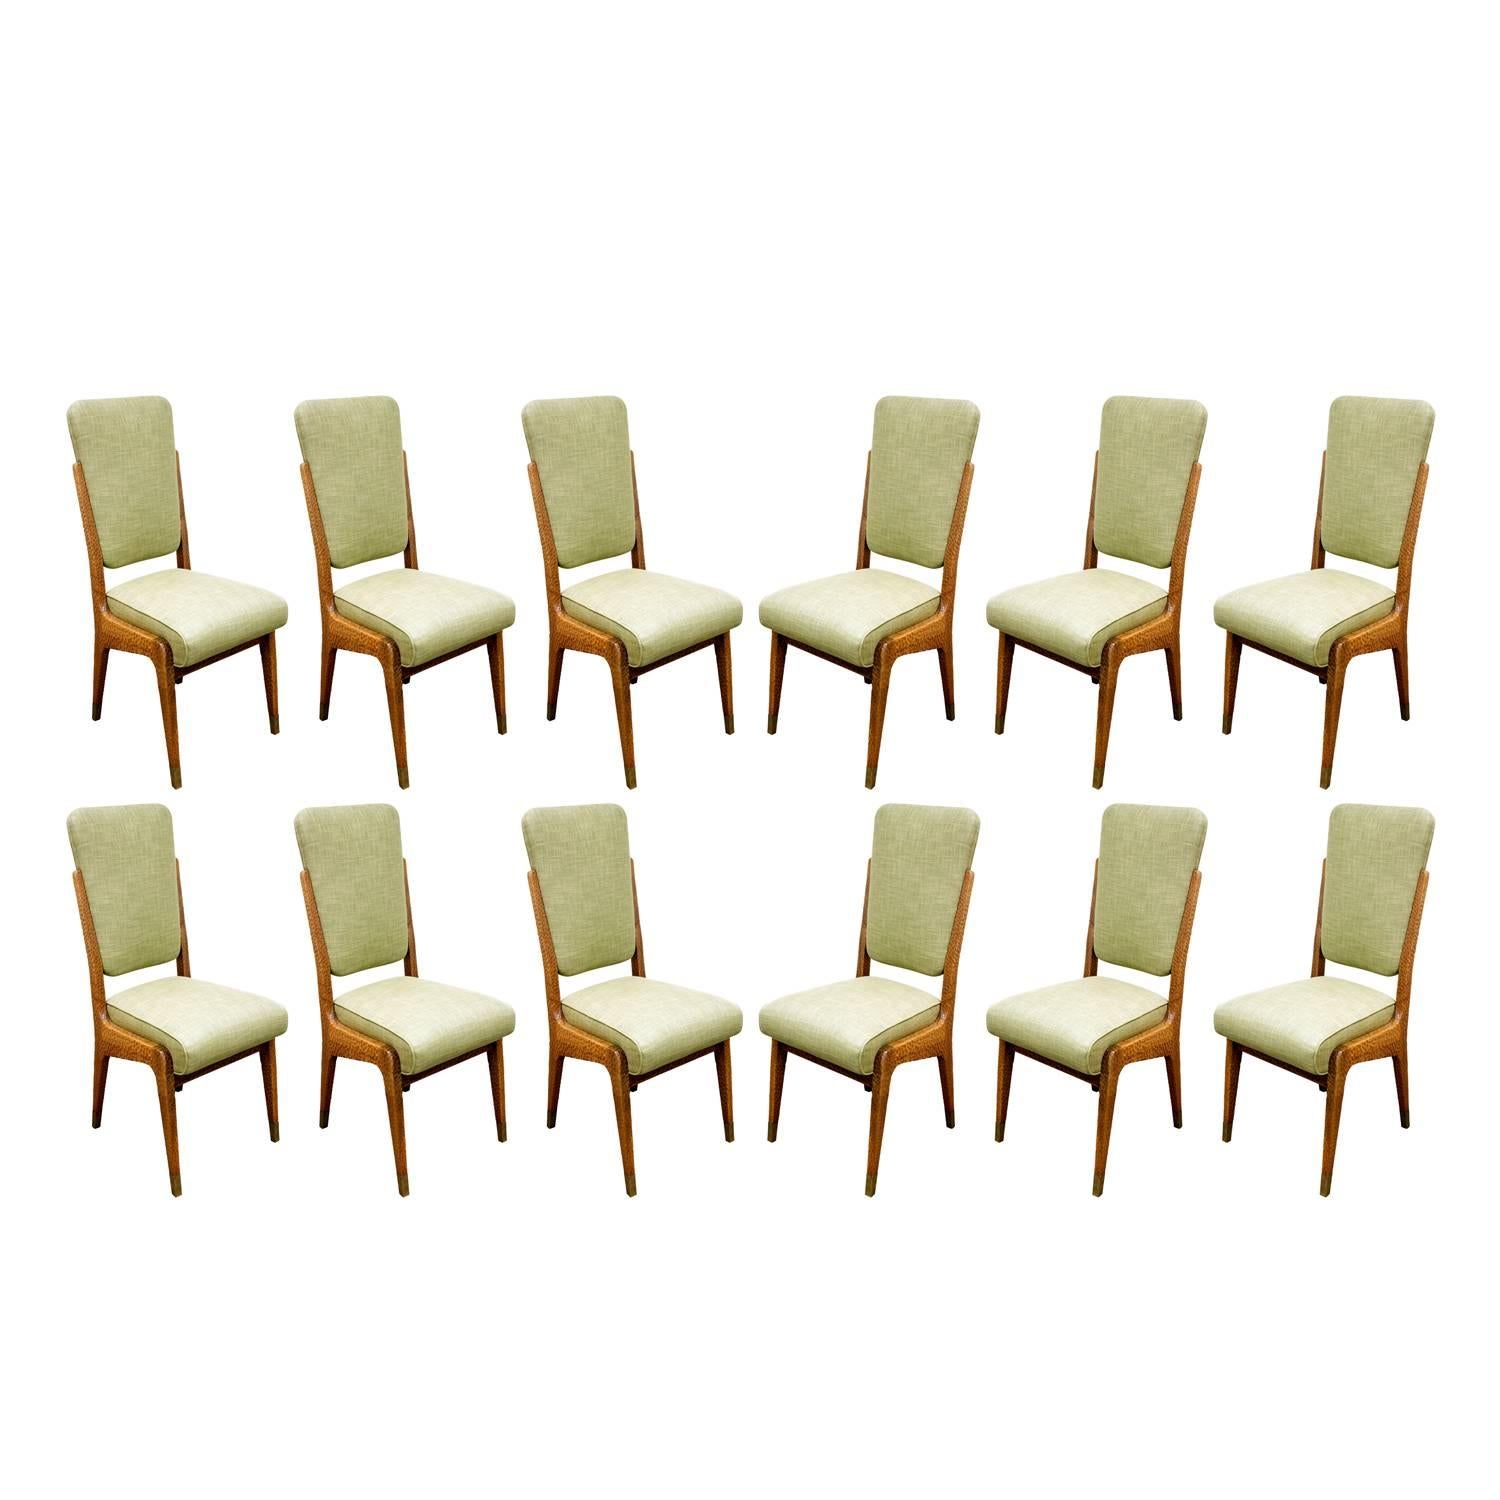 Paolo Buffa Set of 12 Handcrafted Dining Chairs, circa 1940